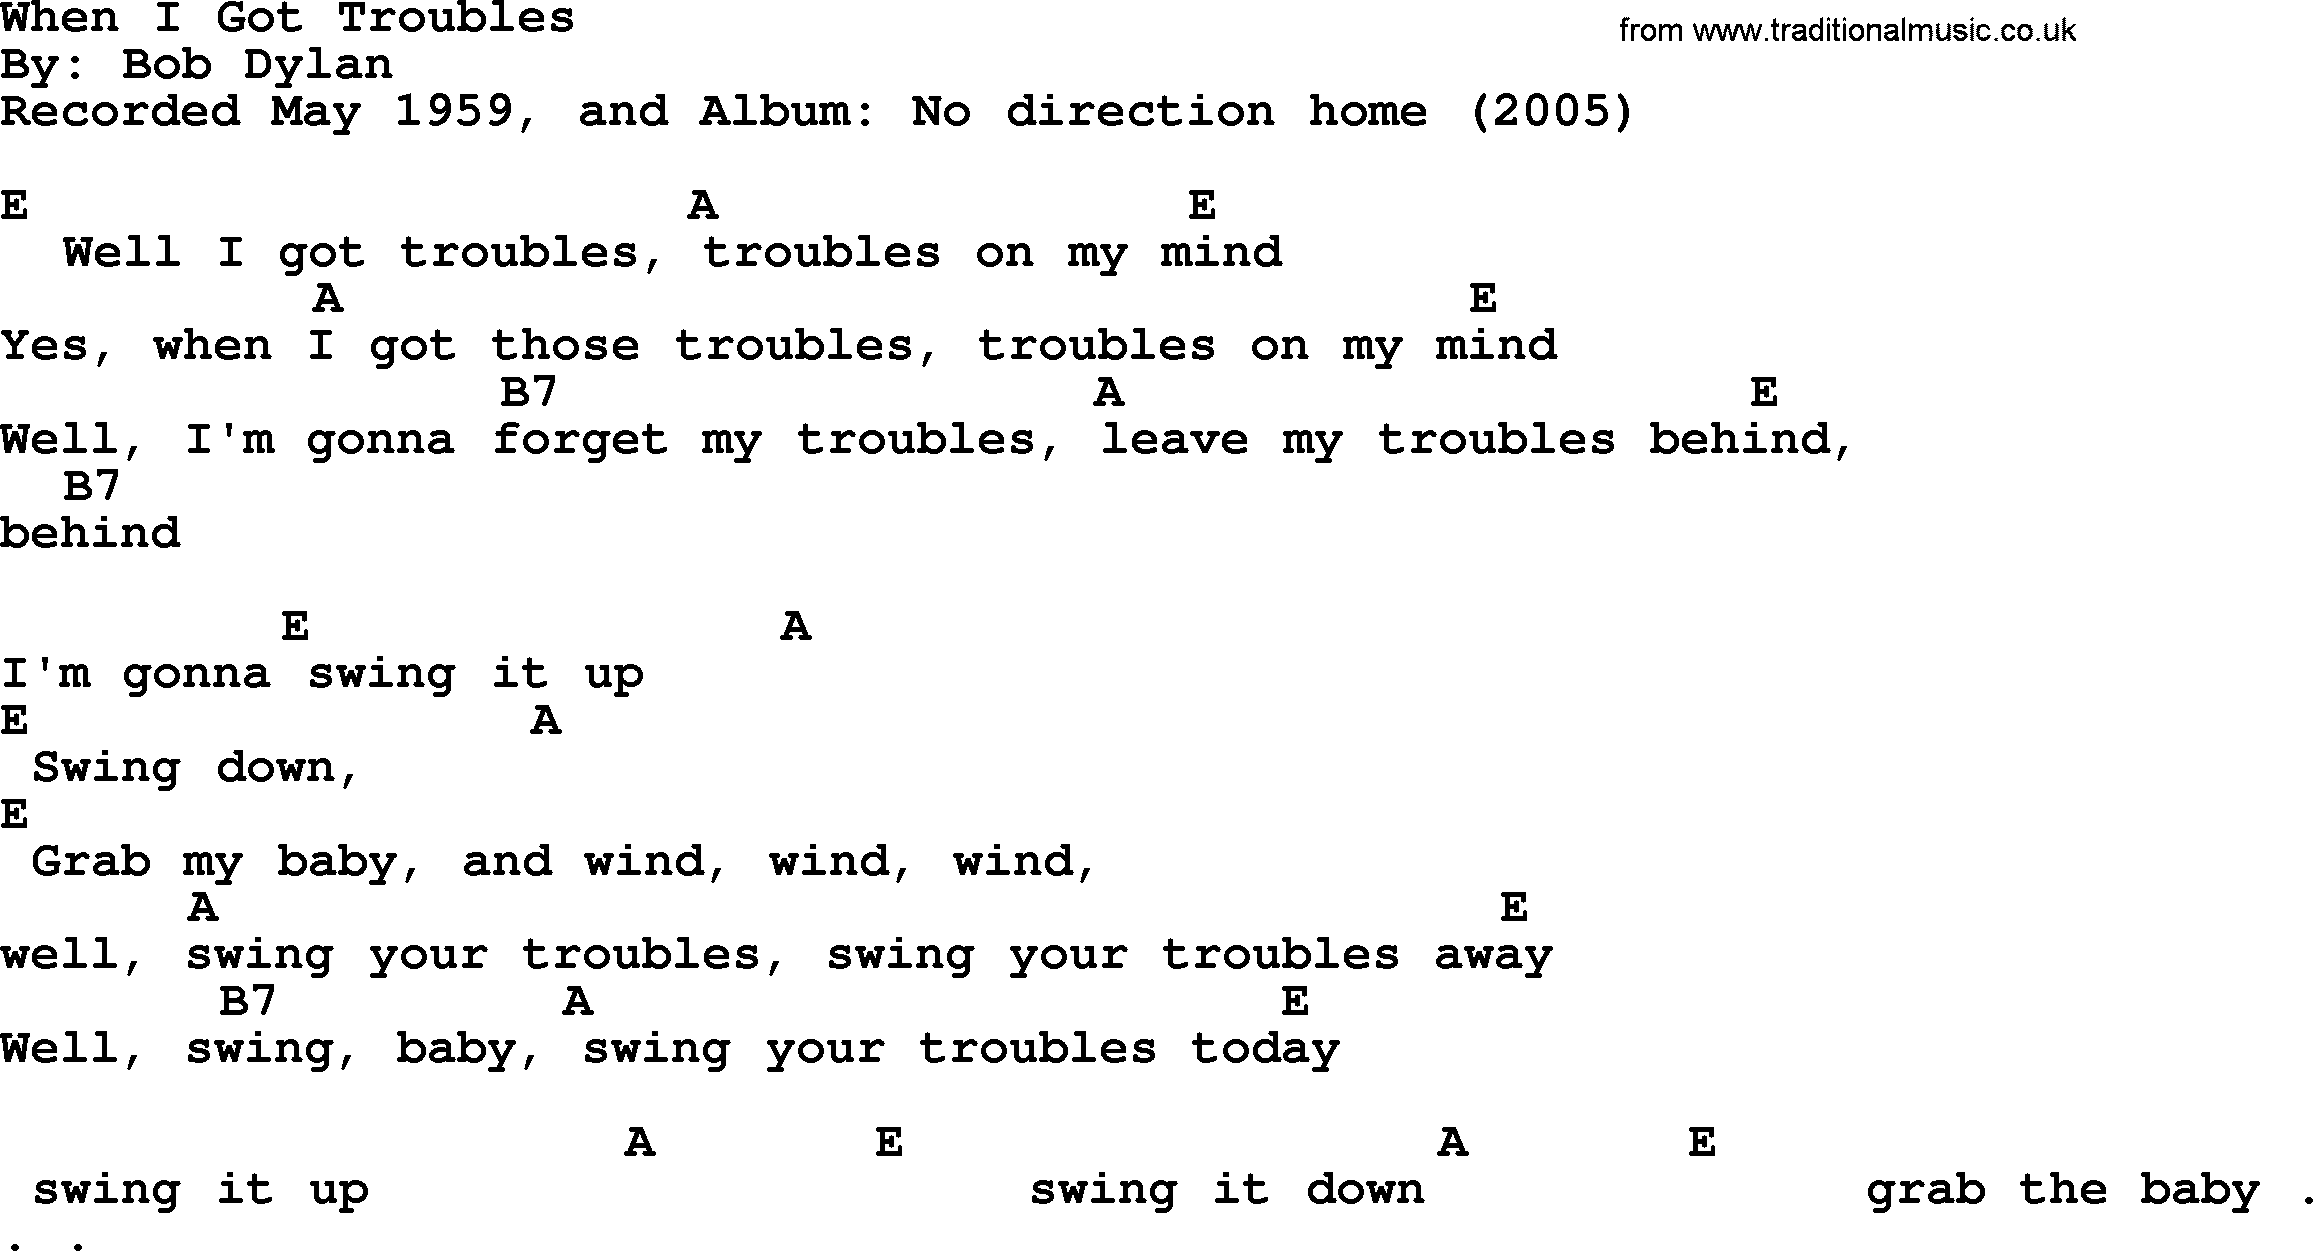 Bob Dylan song, lyrics with chords - When I Got Troubles